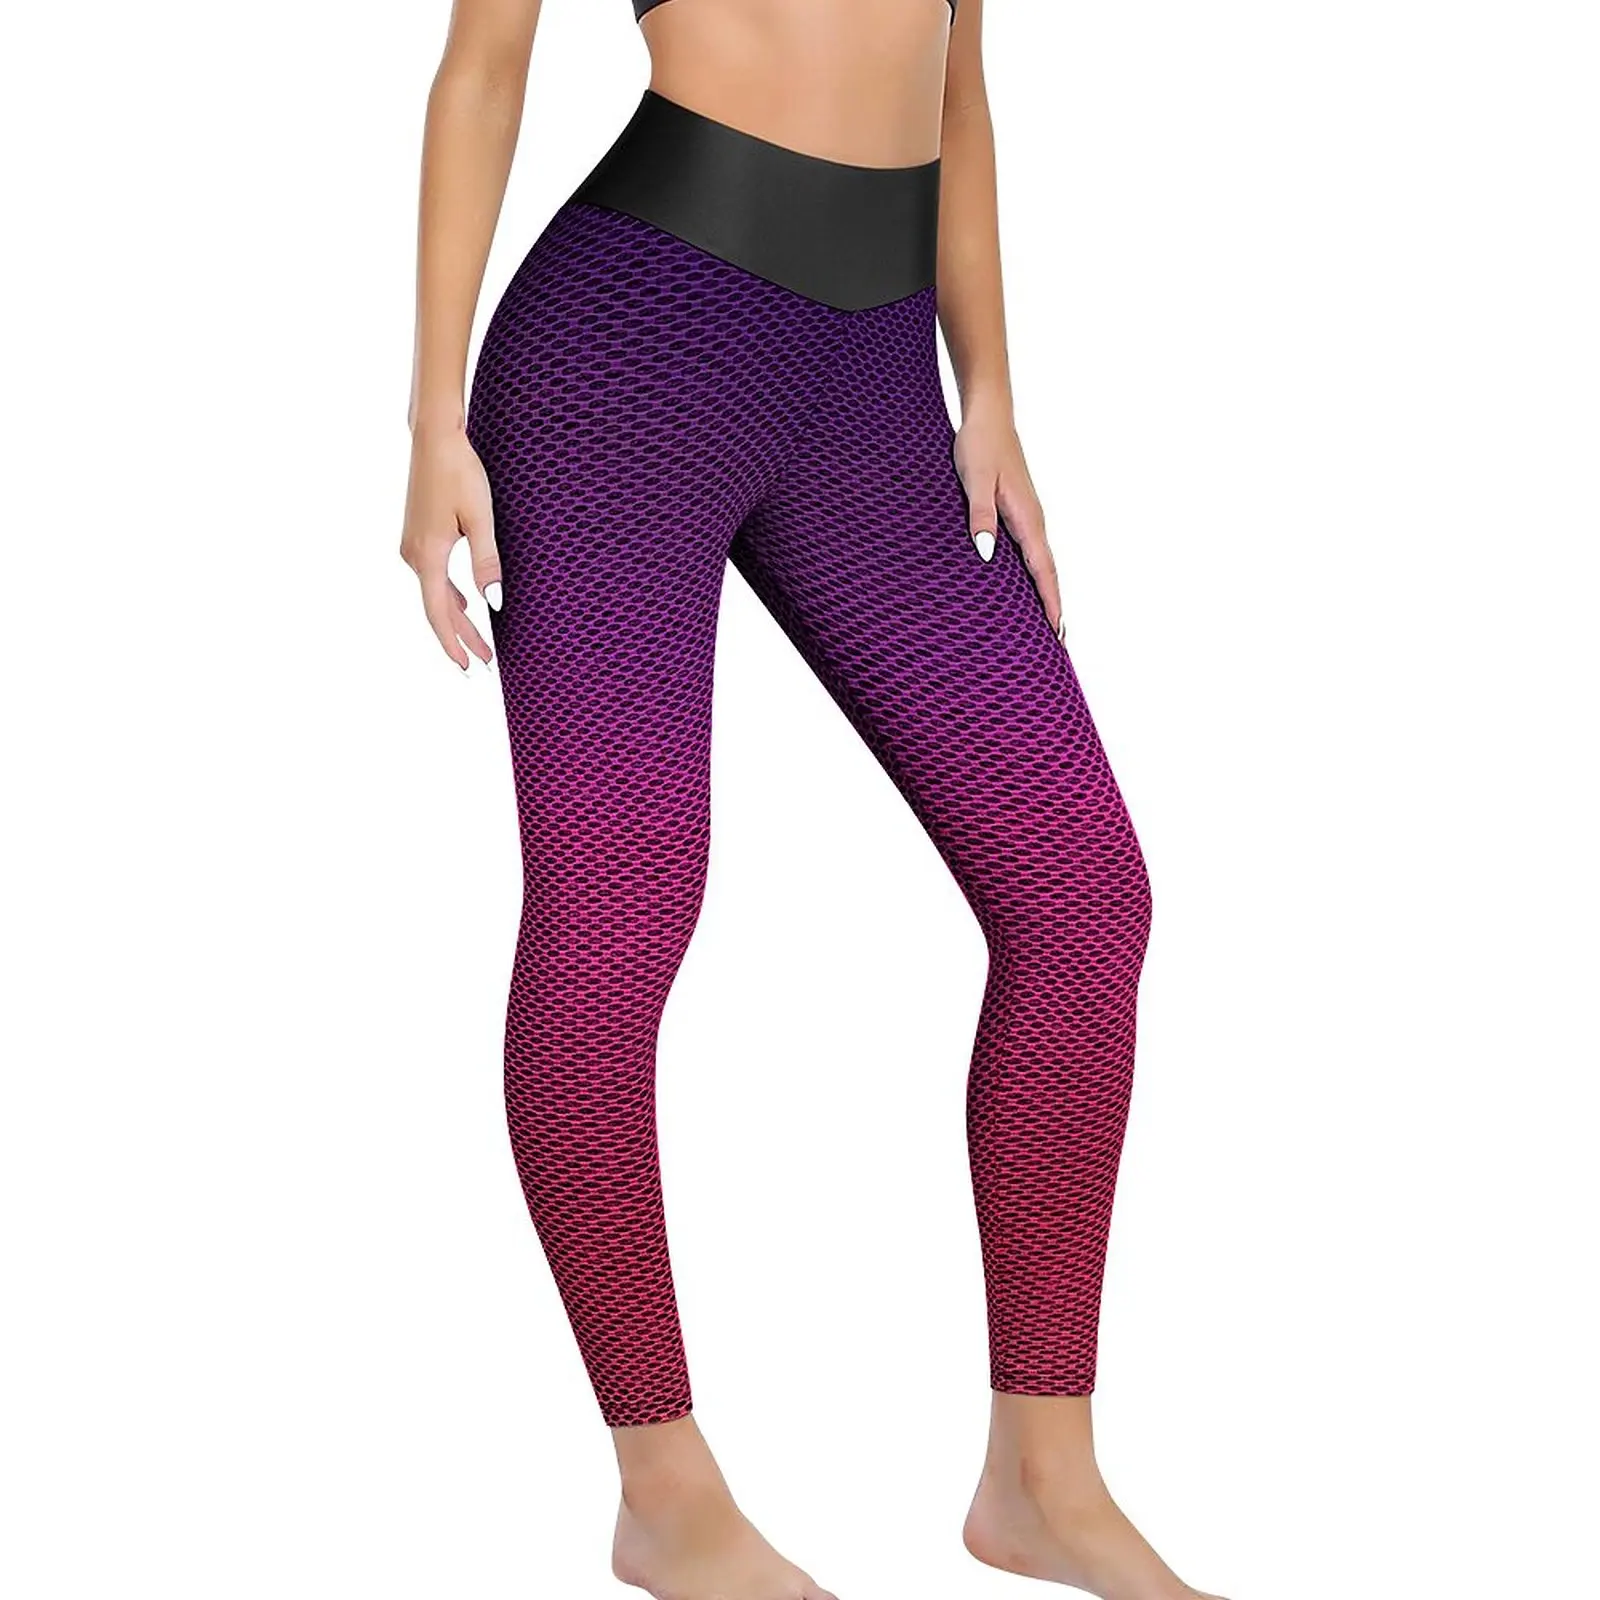 

Ombre Abstract Leggings Sexy Neon Purple And Pink Push Up Yoga Pants Cute Seamless Leggins Female Design Gym Sport Legging